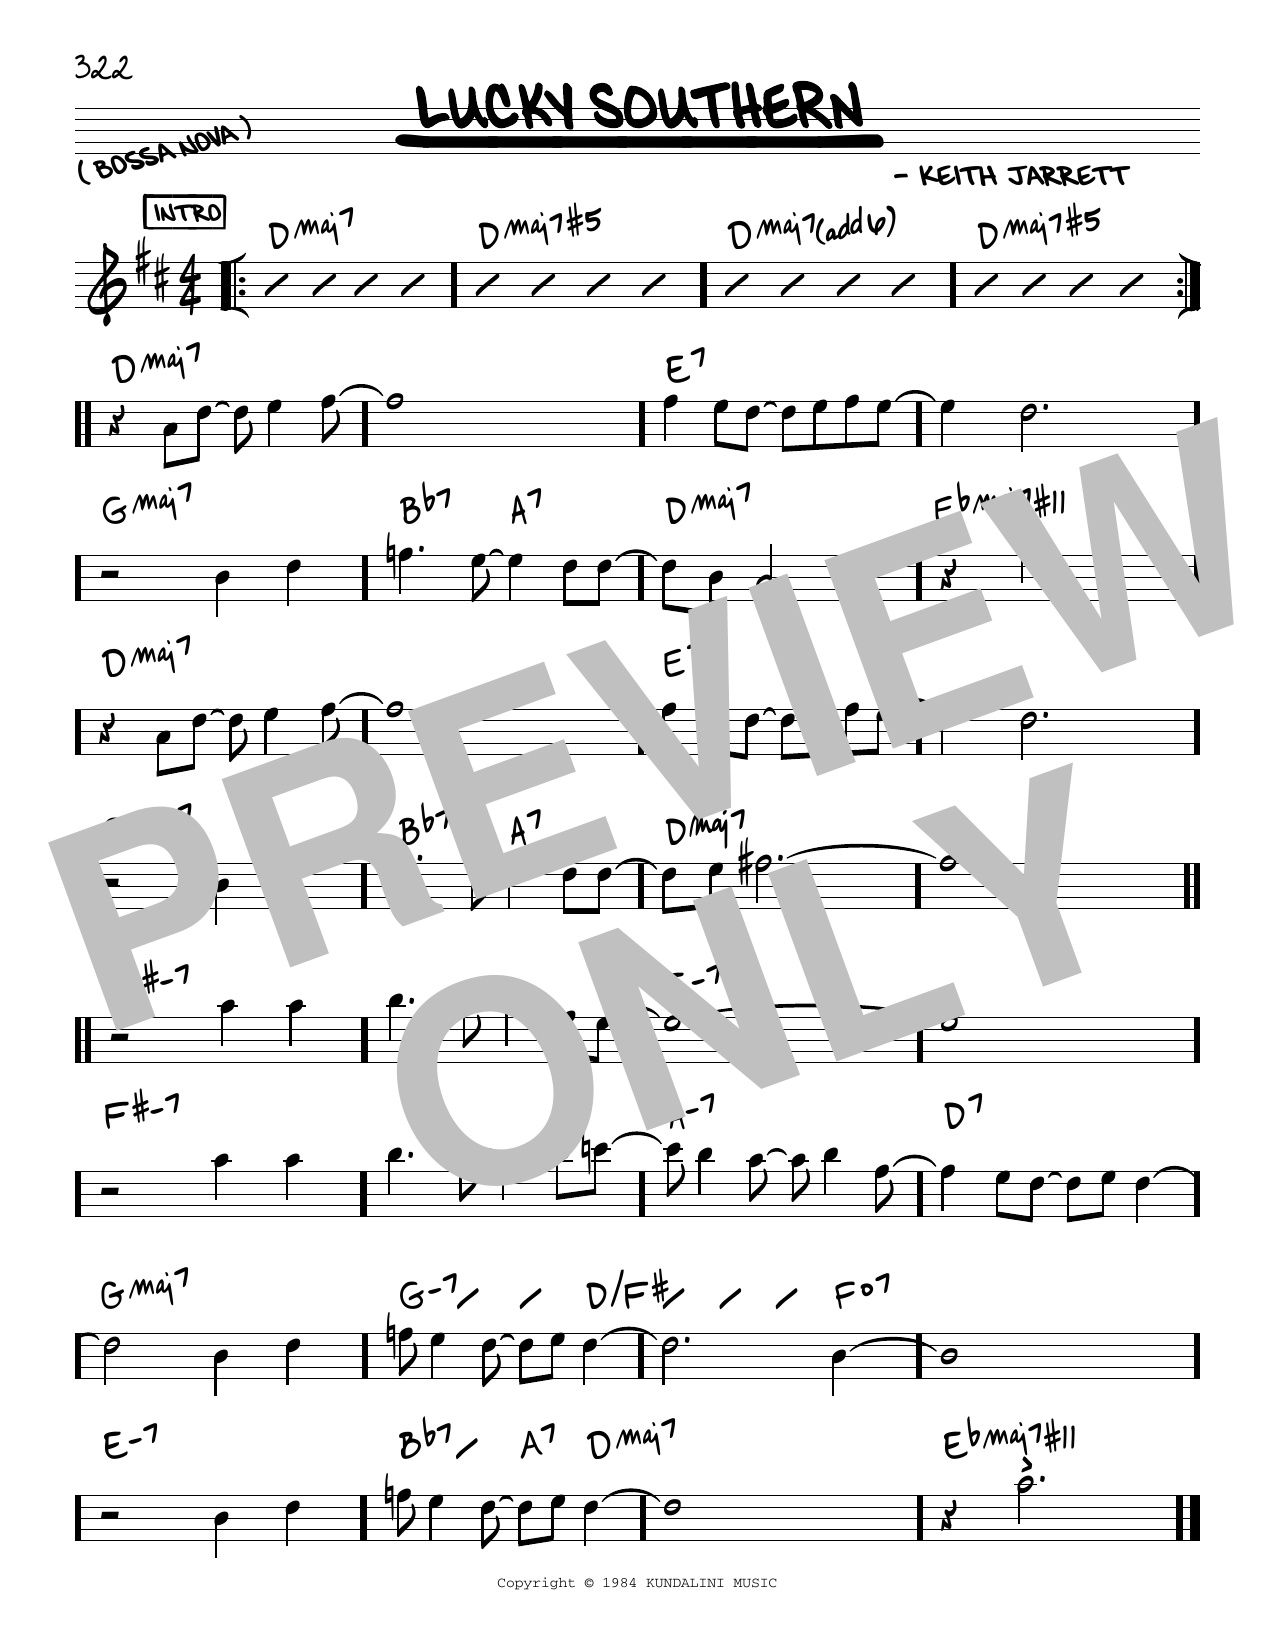 Download Keith Jarrett Lucky Southern Sheet Music